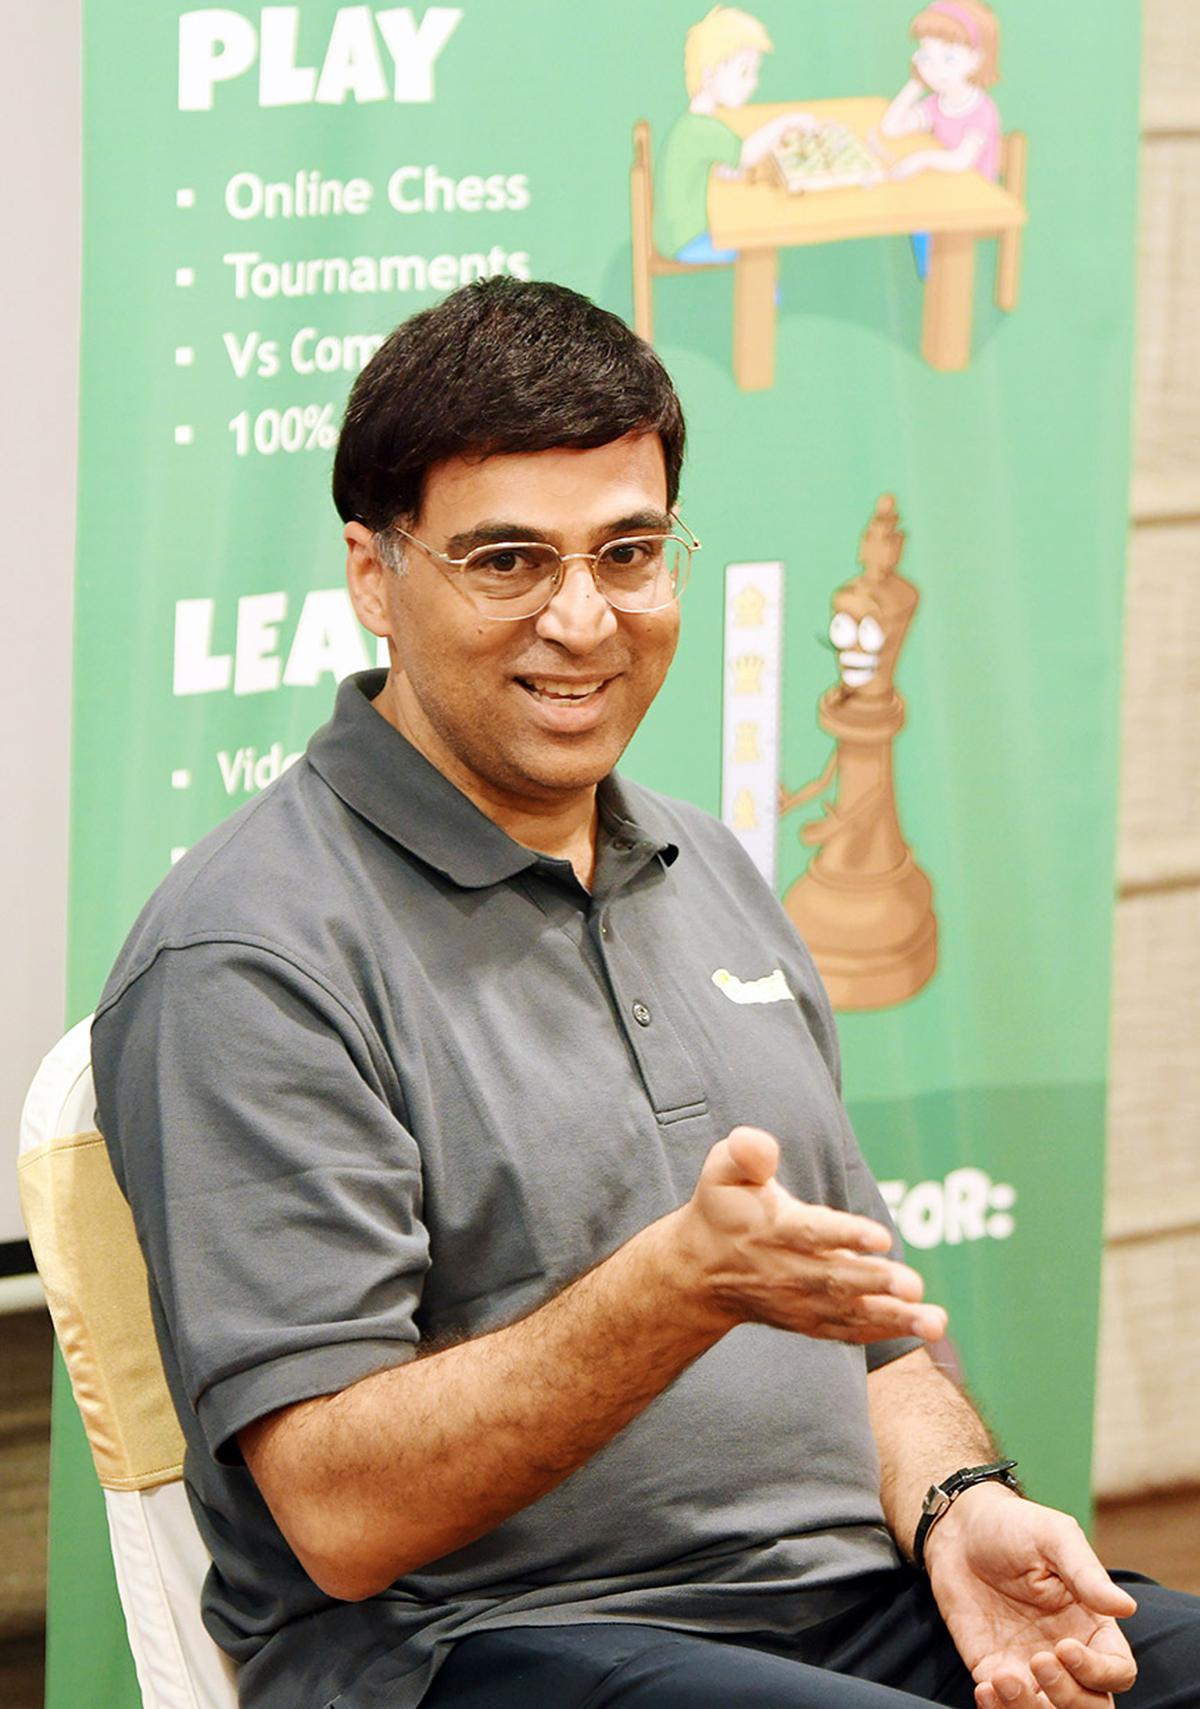 USD 50,555 raised from Viswanathan Anand and four Grandmasters